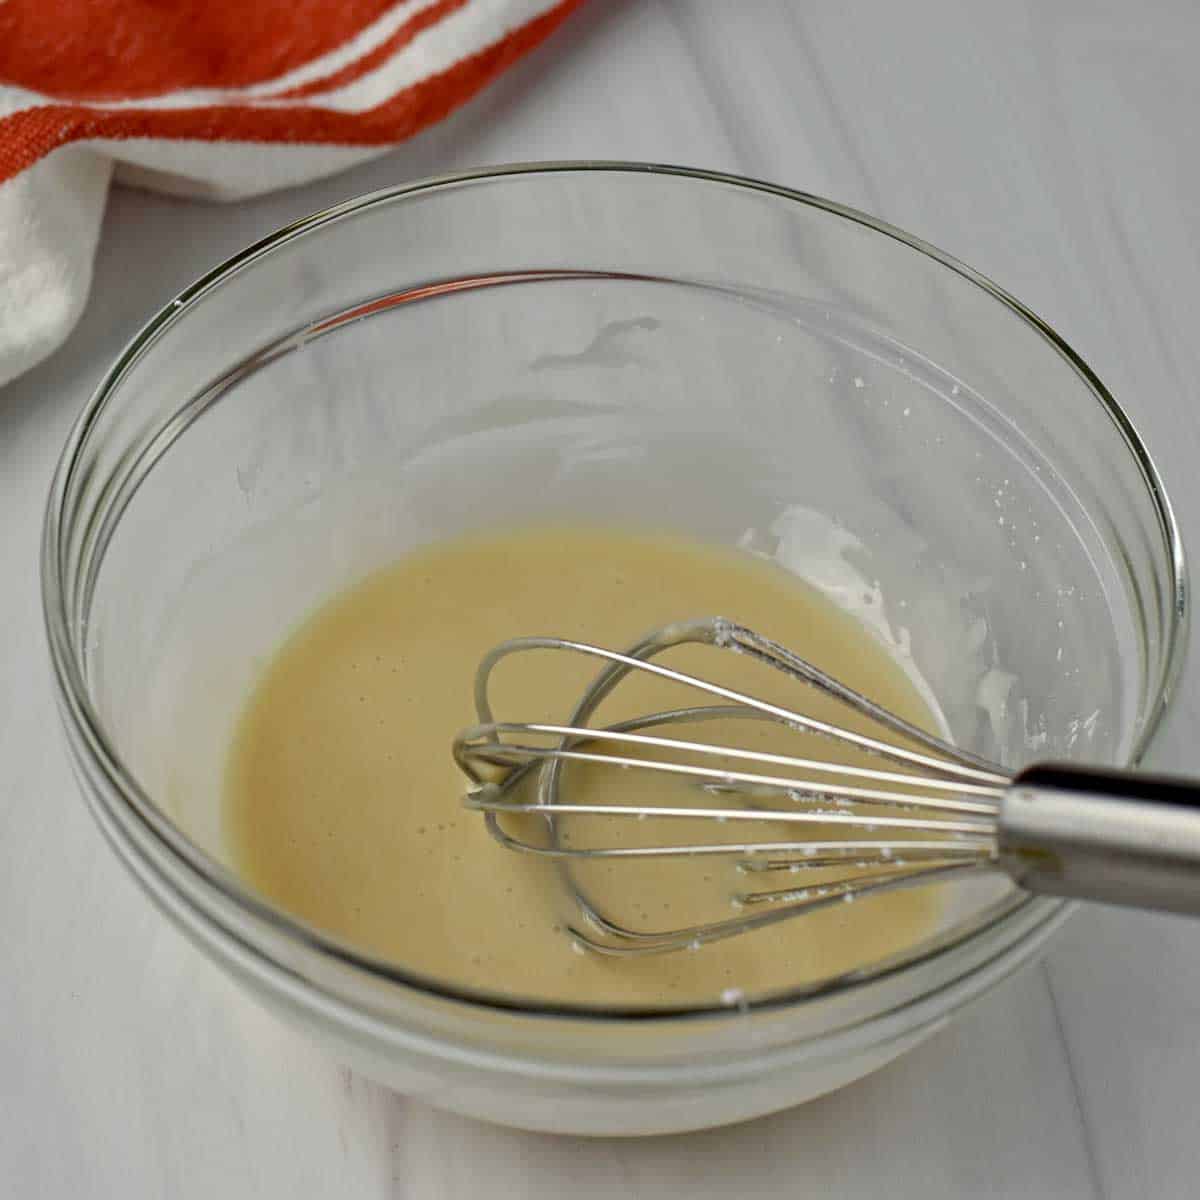 Ingredients for apple fritter glaze whisked together with wire whisk in small glass mixing bowl.